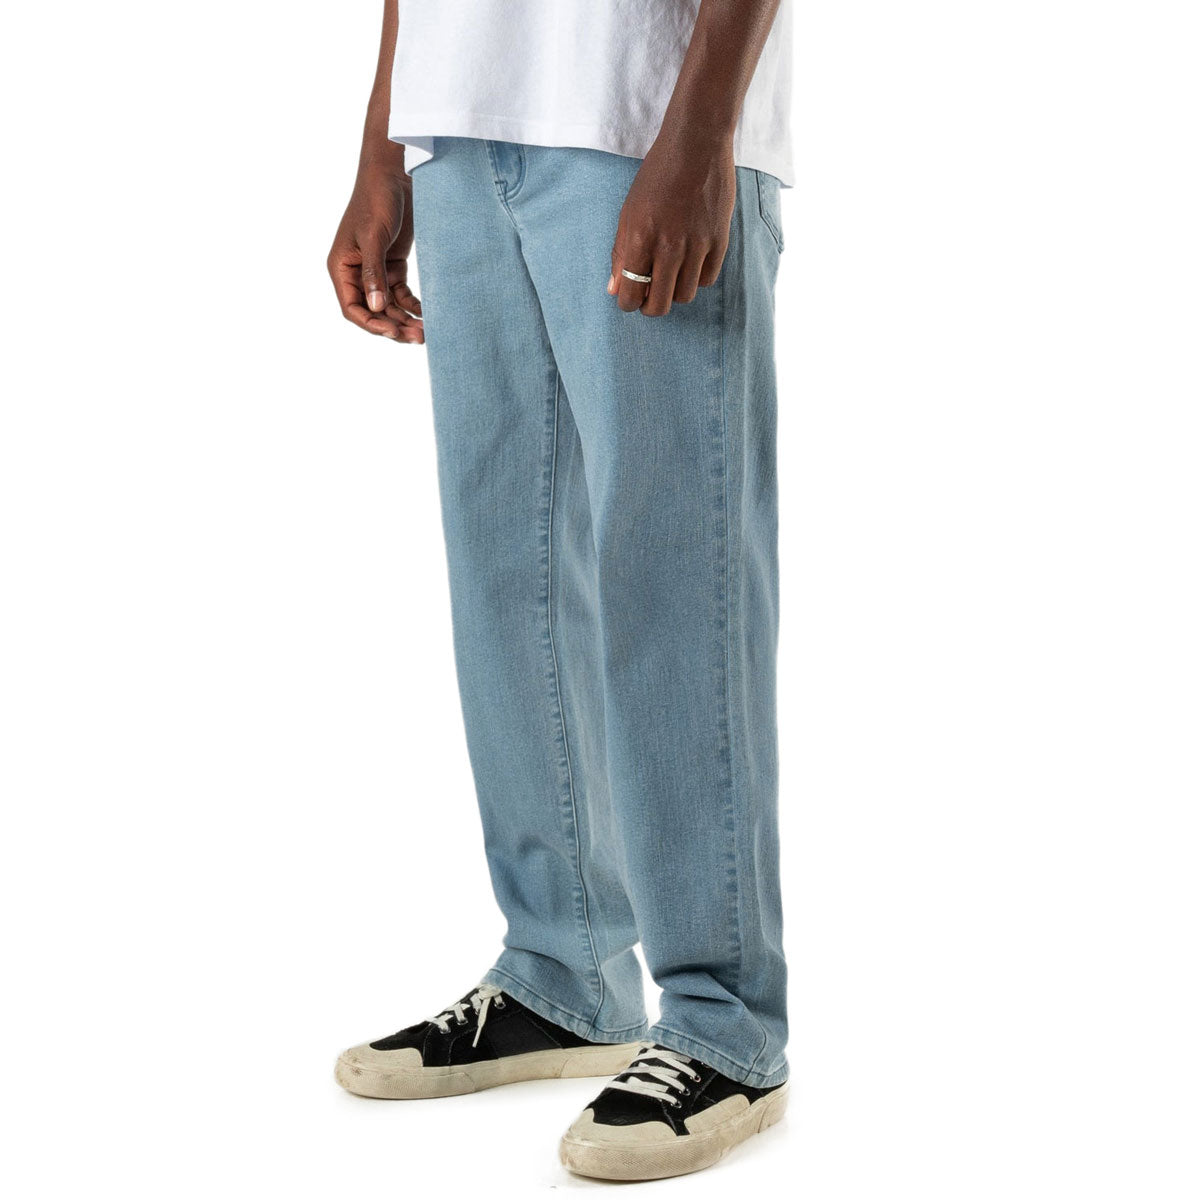 Former Crux Jeans - Blue Fade image 3